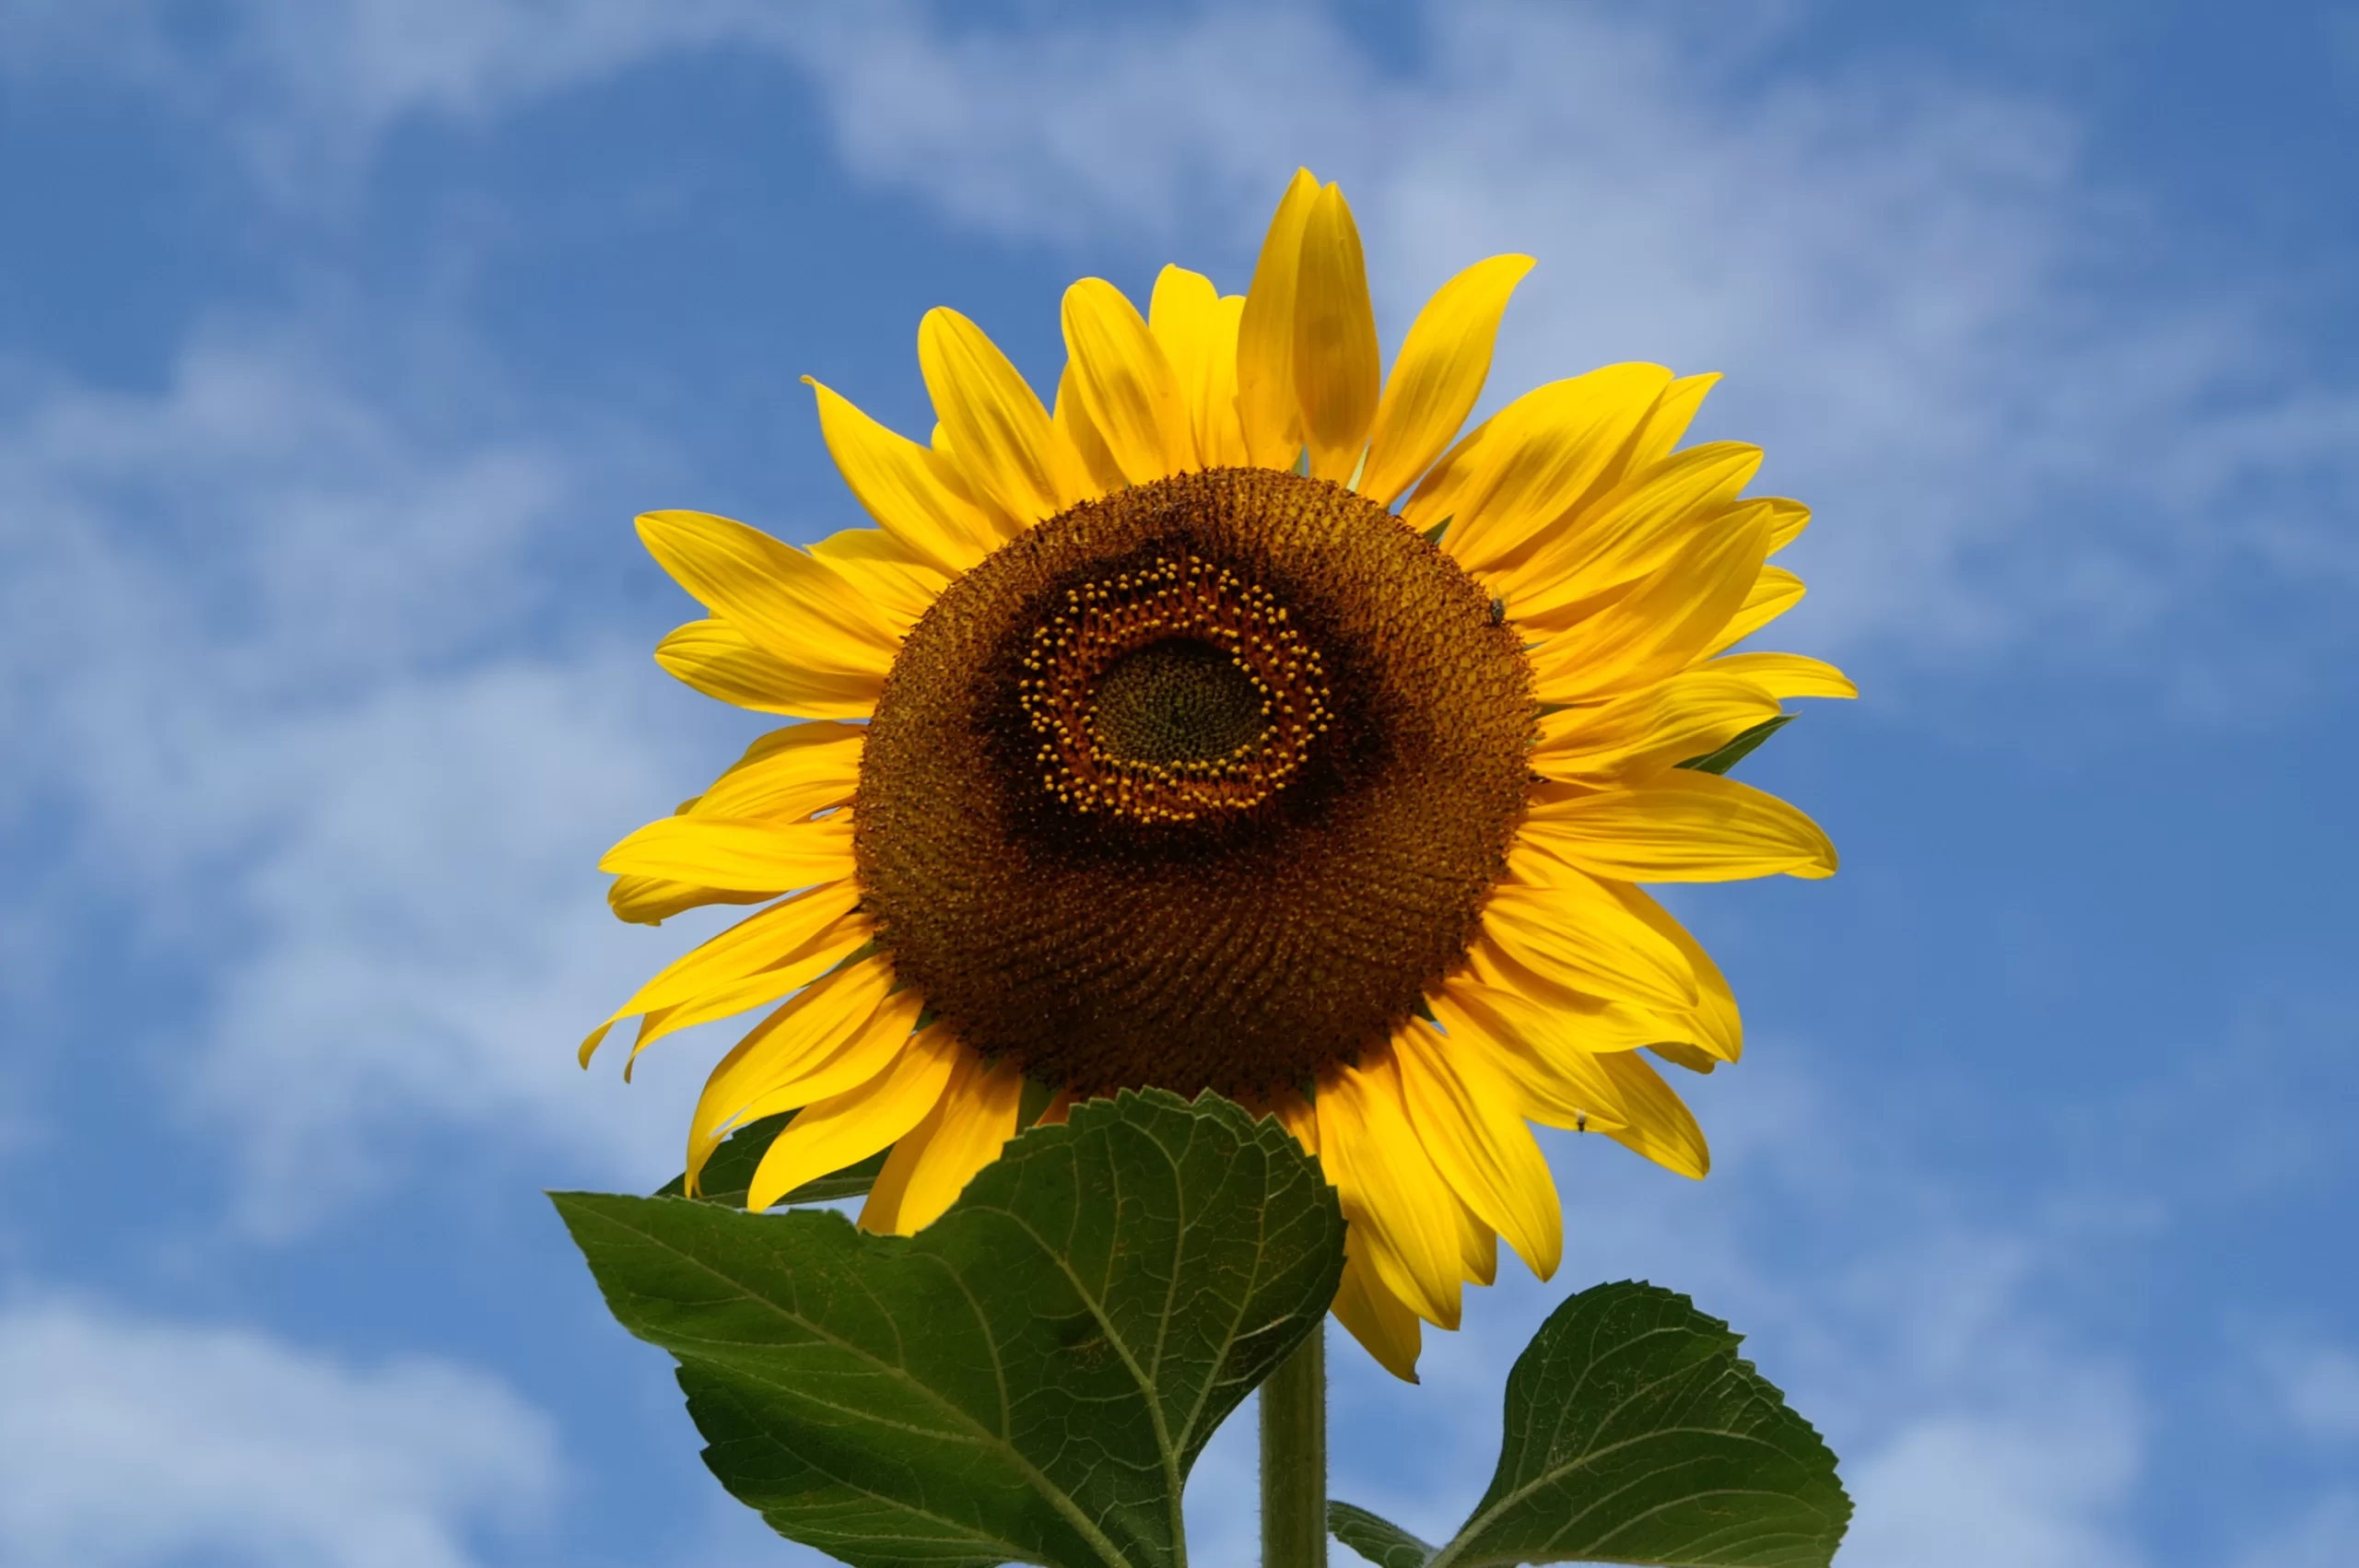 A sunflower in front of a blue sky represents optimal health.